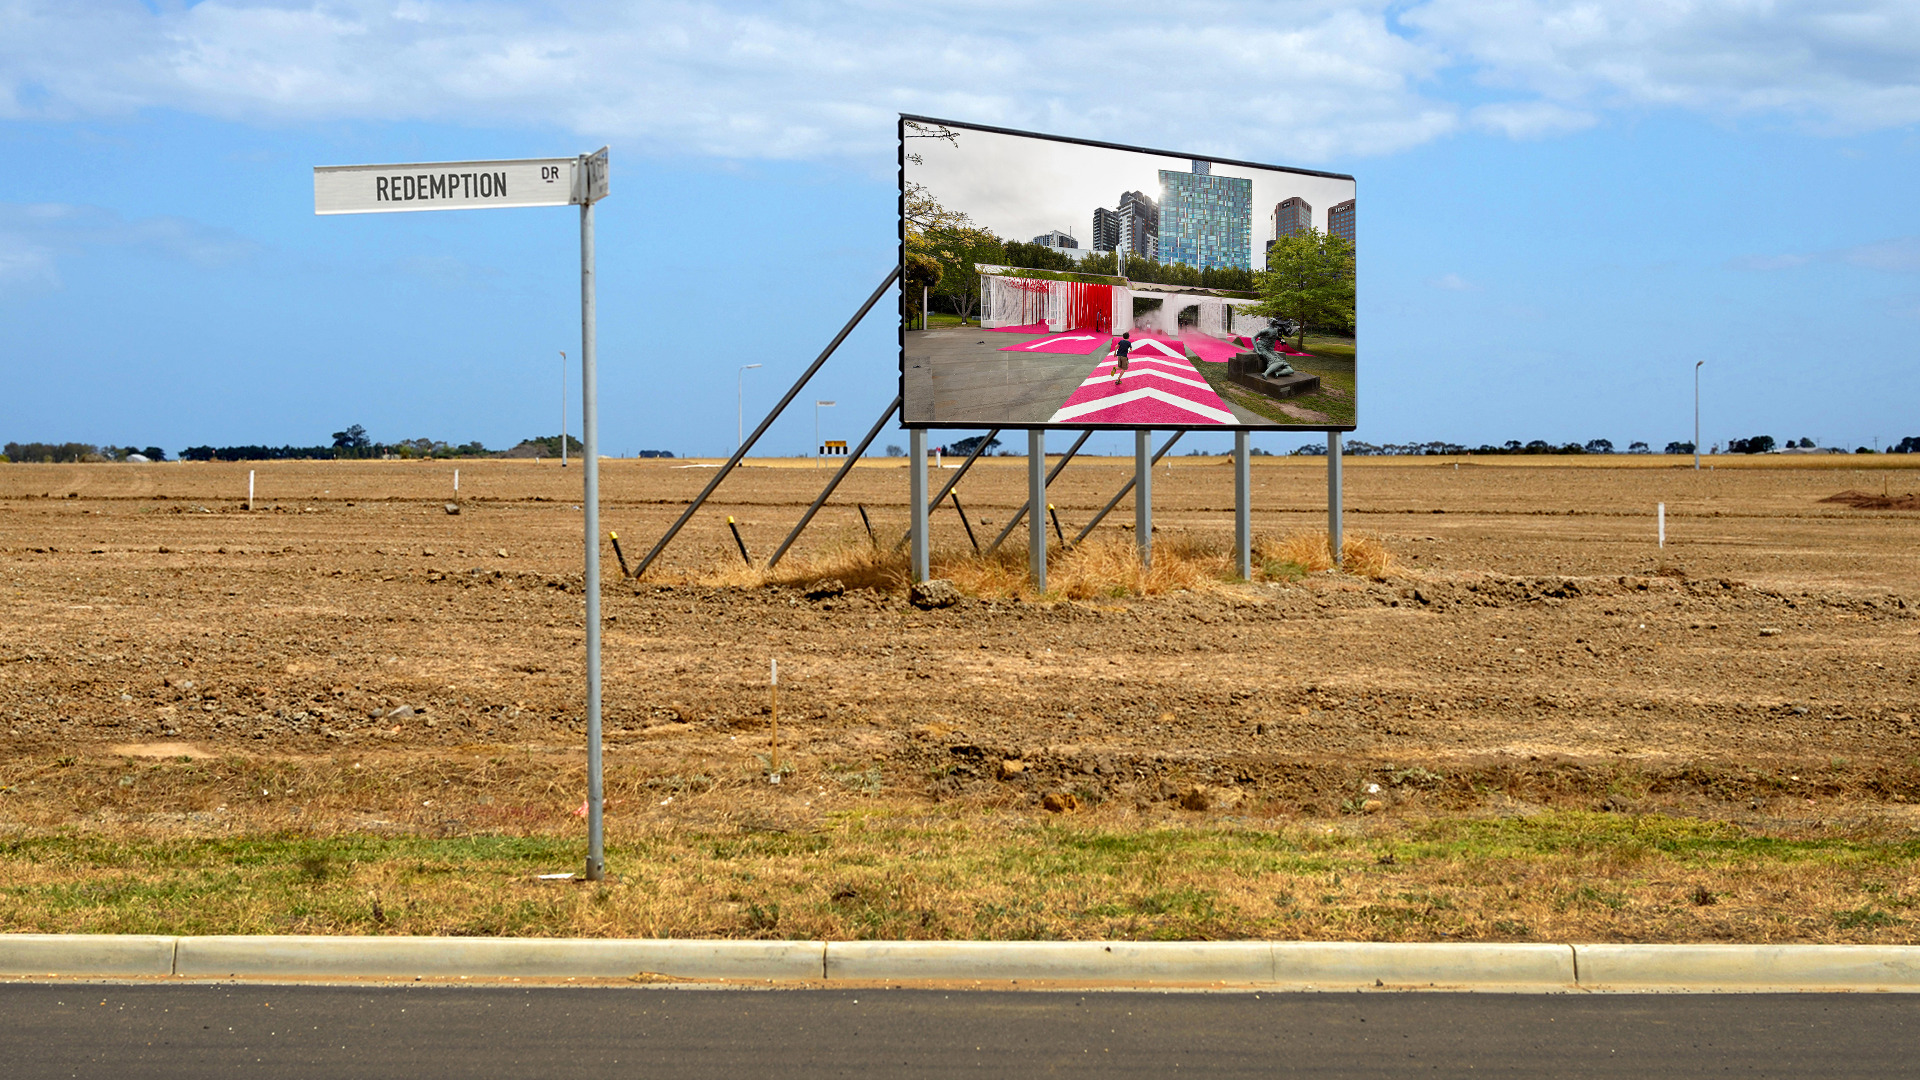 A billboard in farmland that is being transformed into a new suburb